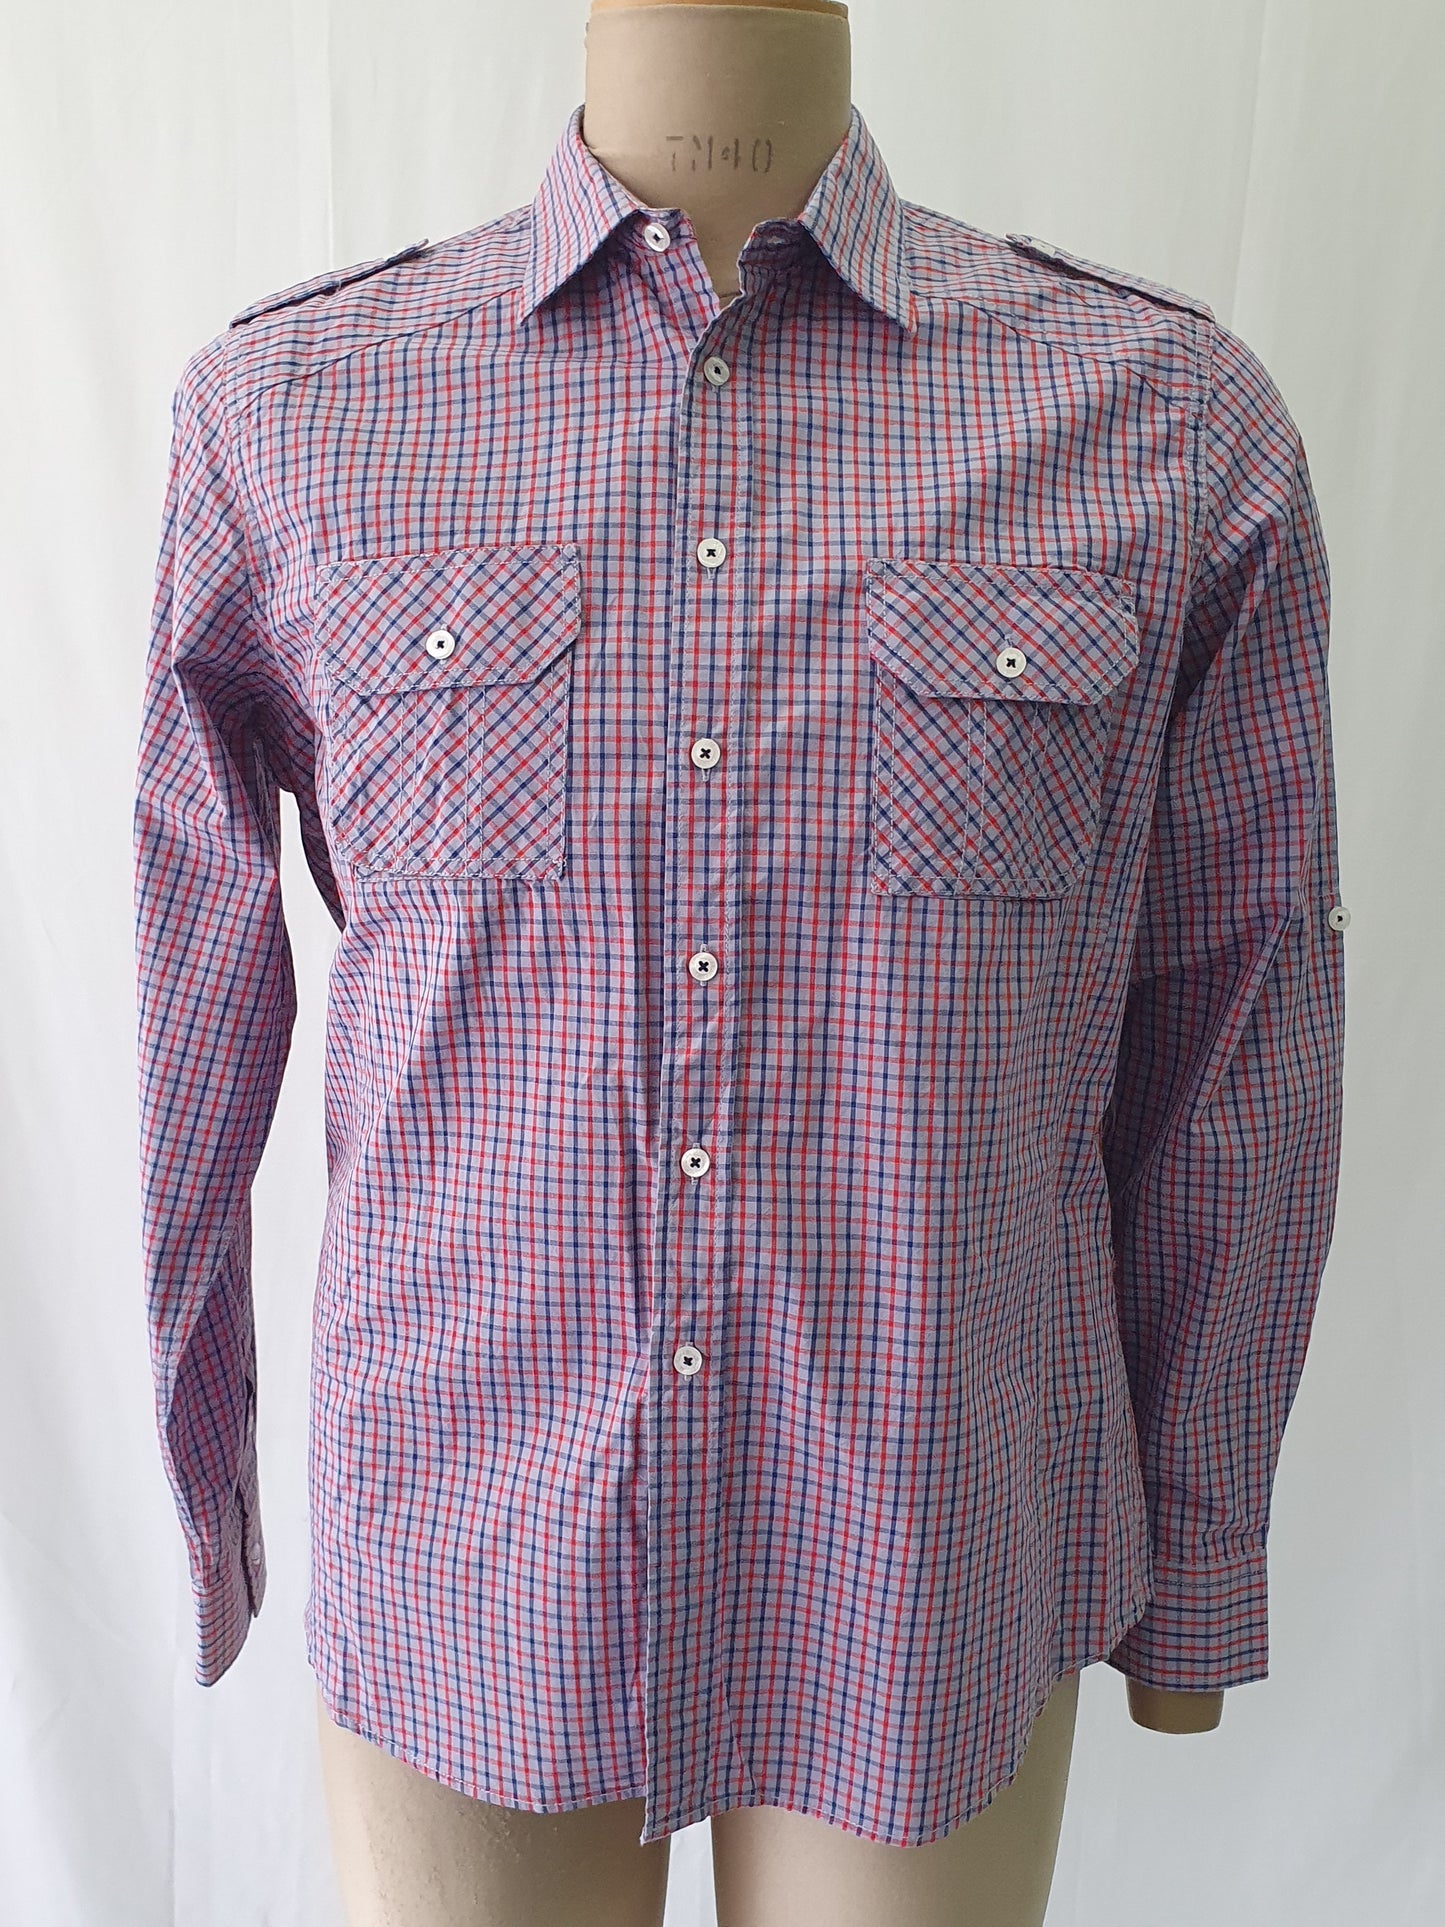 PW5825135s - Pelaco Navy & Red check casual shirt - Slim Fit